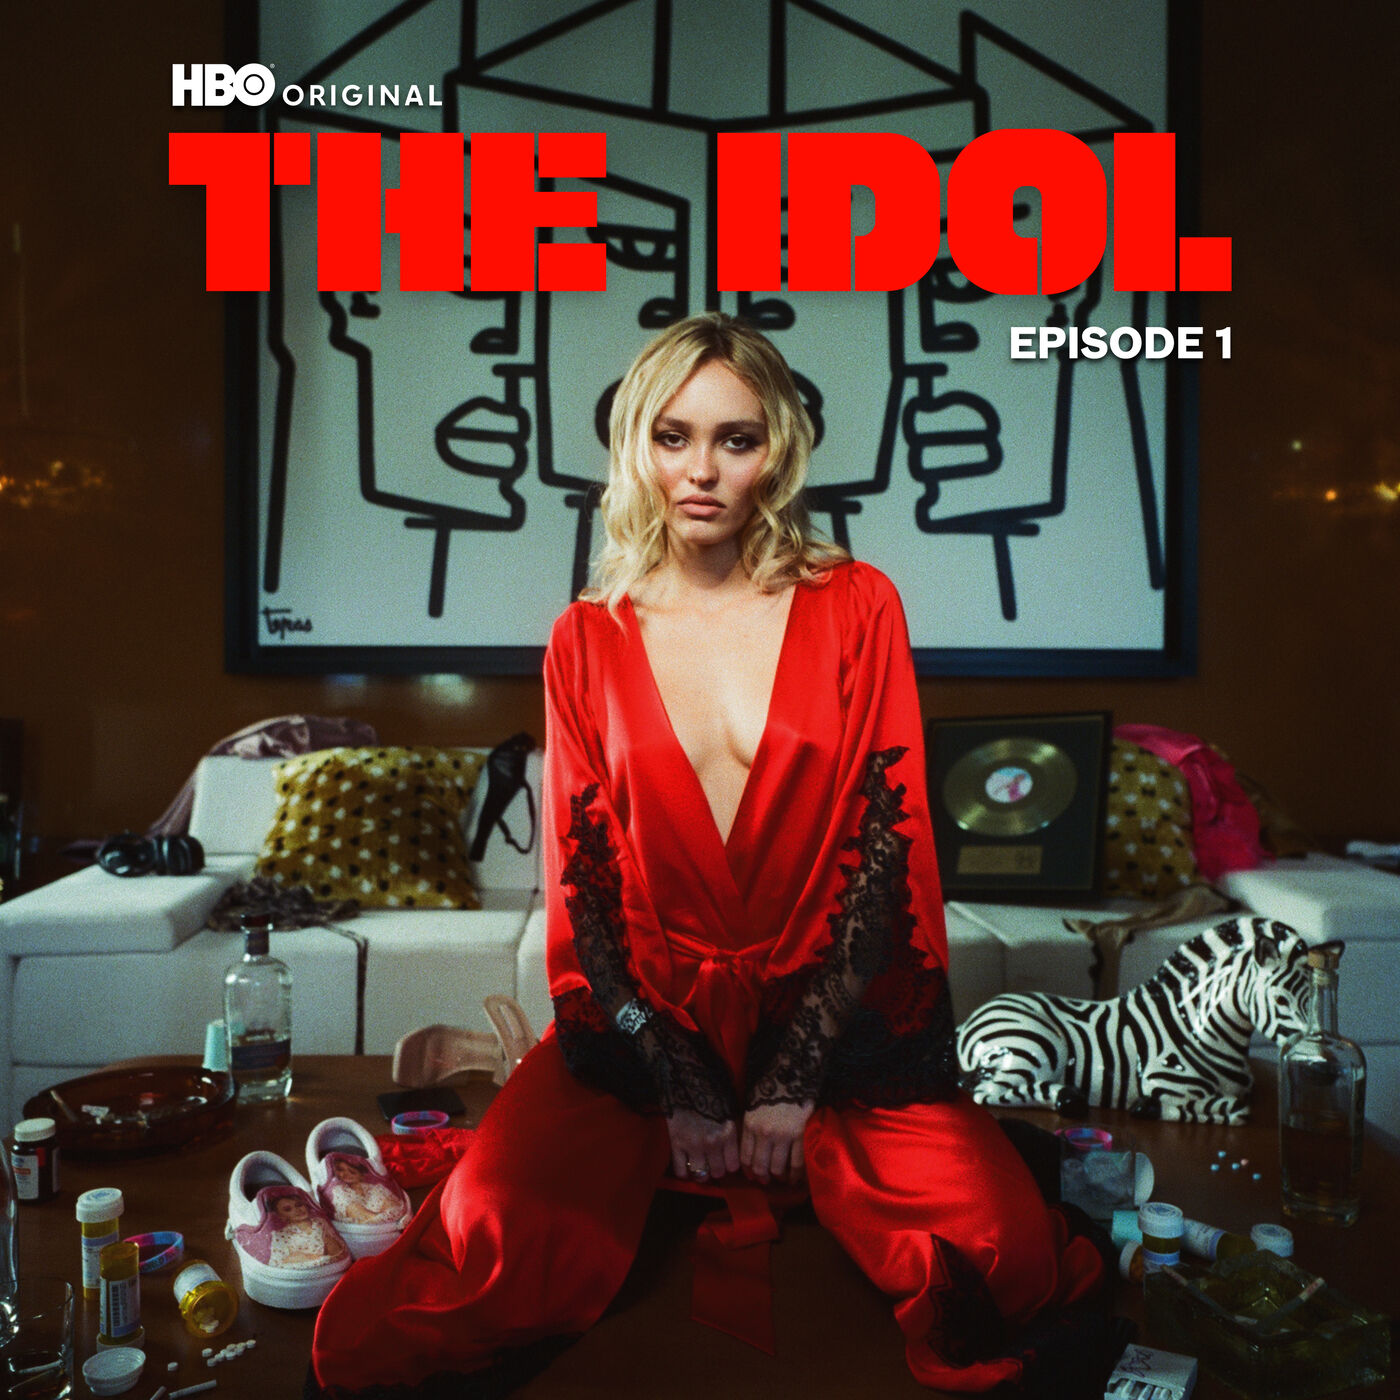 The Weeknd – The Idol Episode 1 (Music from the HBO Original Series)【44.1kHz／16bit】美国区-OppsUpro音乐帝国